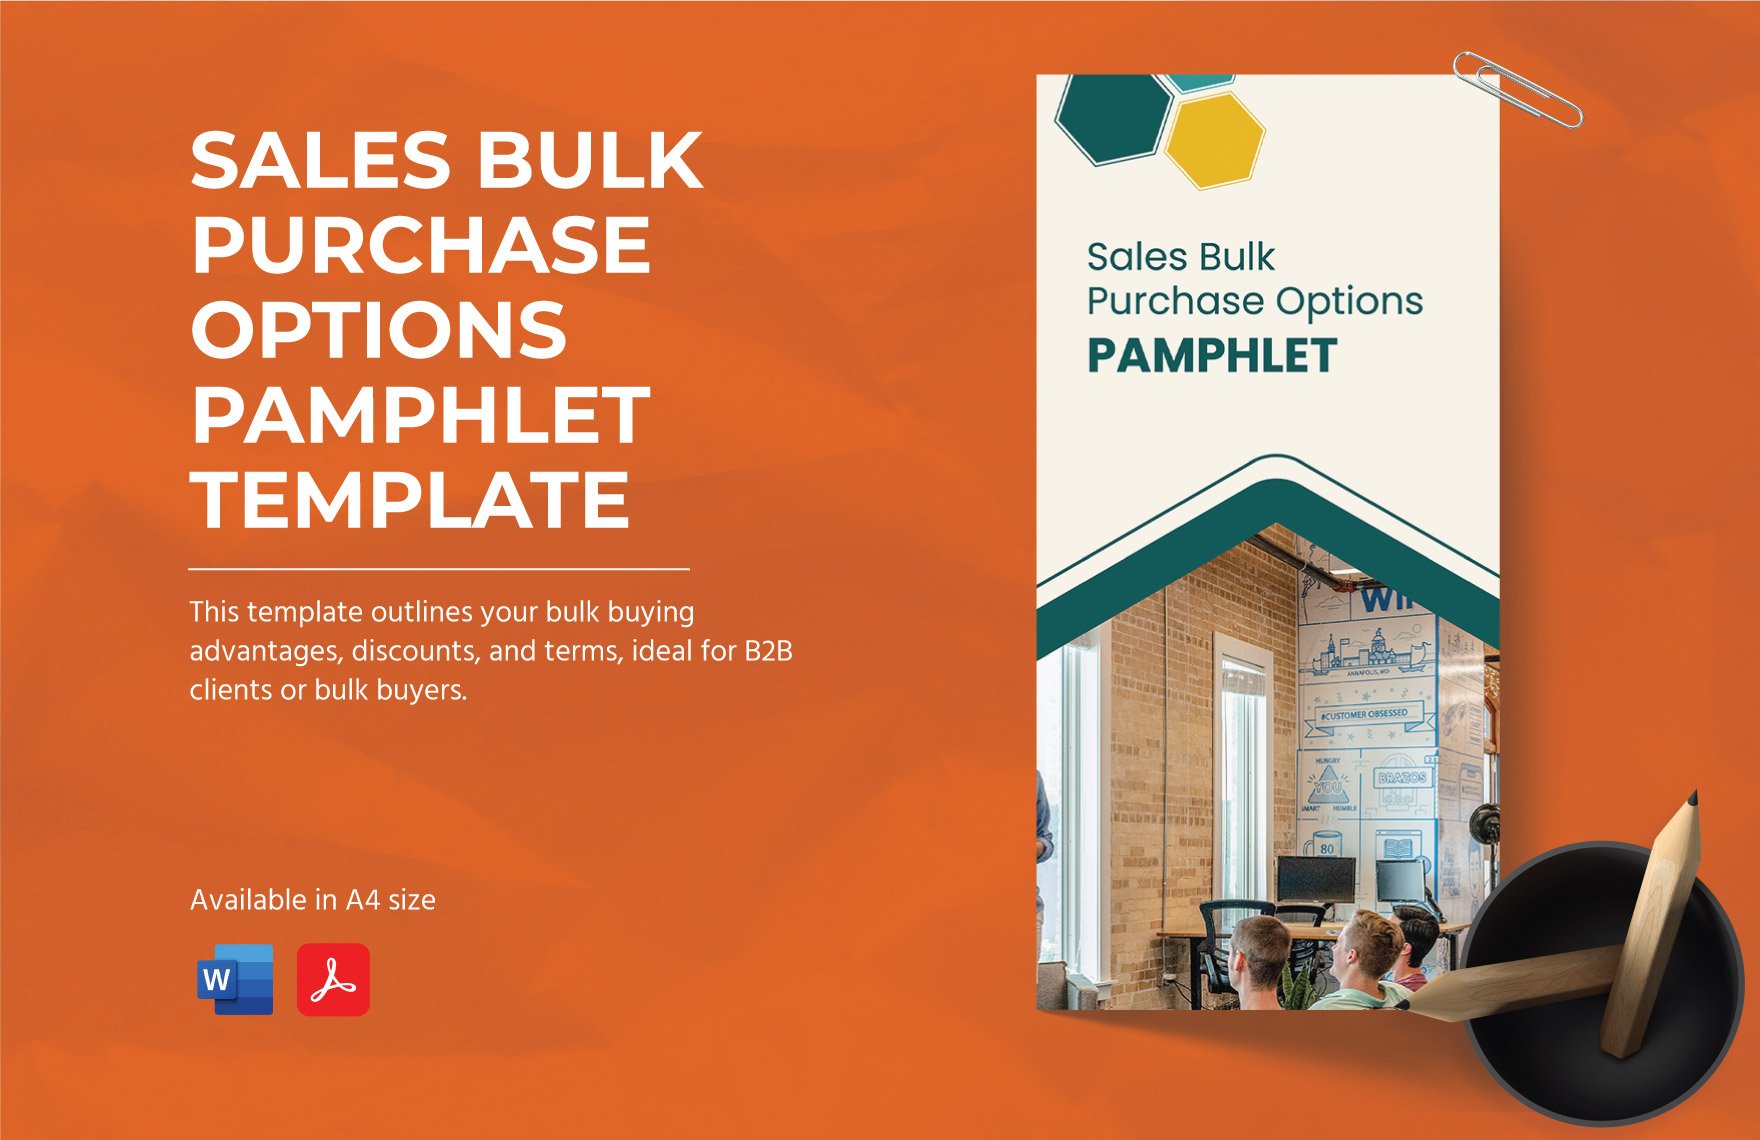 Sales Bulk Purchase Options Pamphlet Template